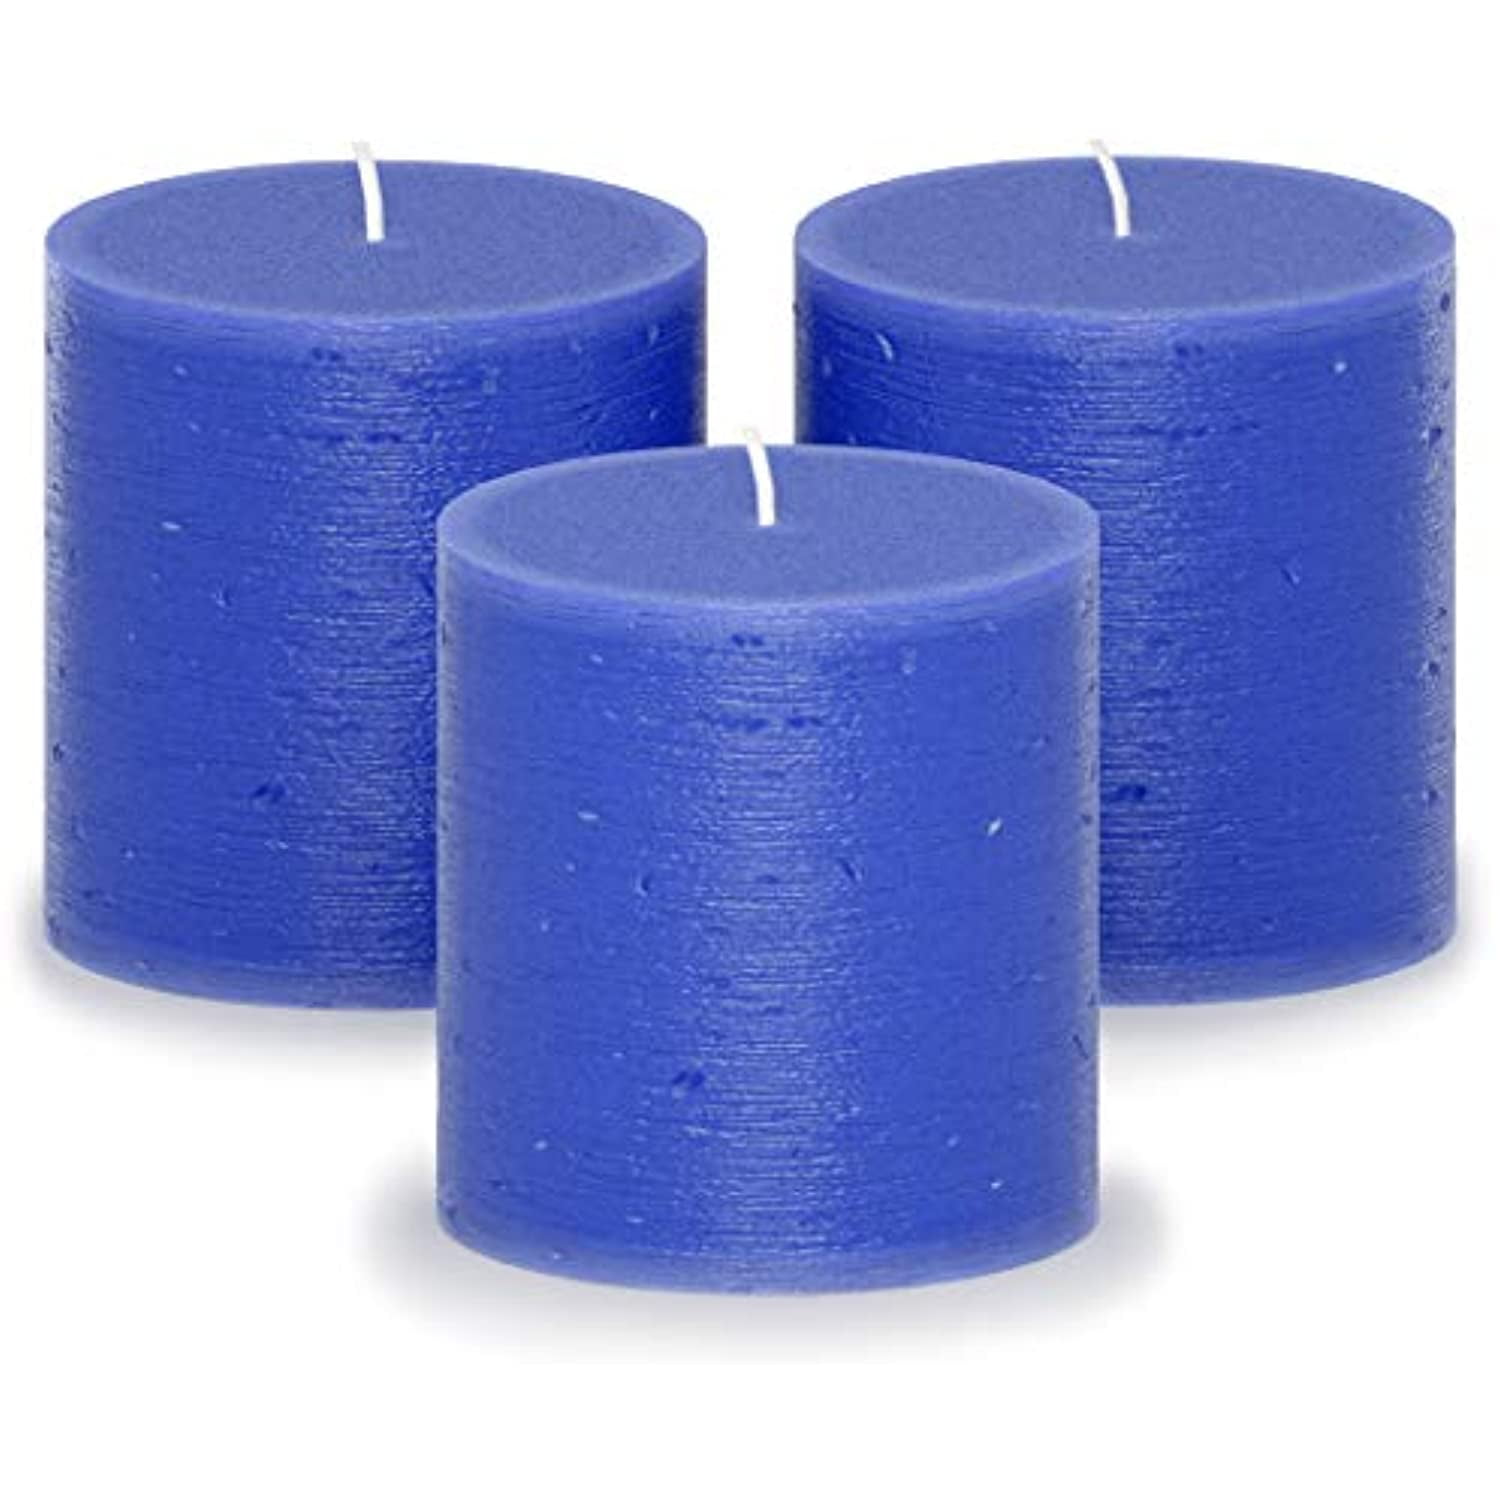 CANDWAX 3x3 Pillar Candle Set of 3 Decorative Unscented No Drip Baby Blue 